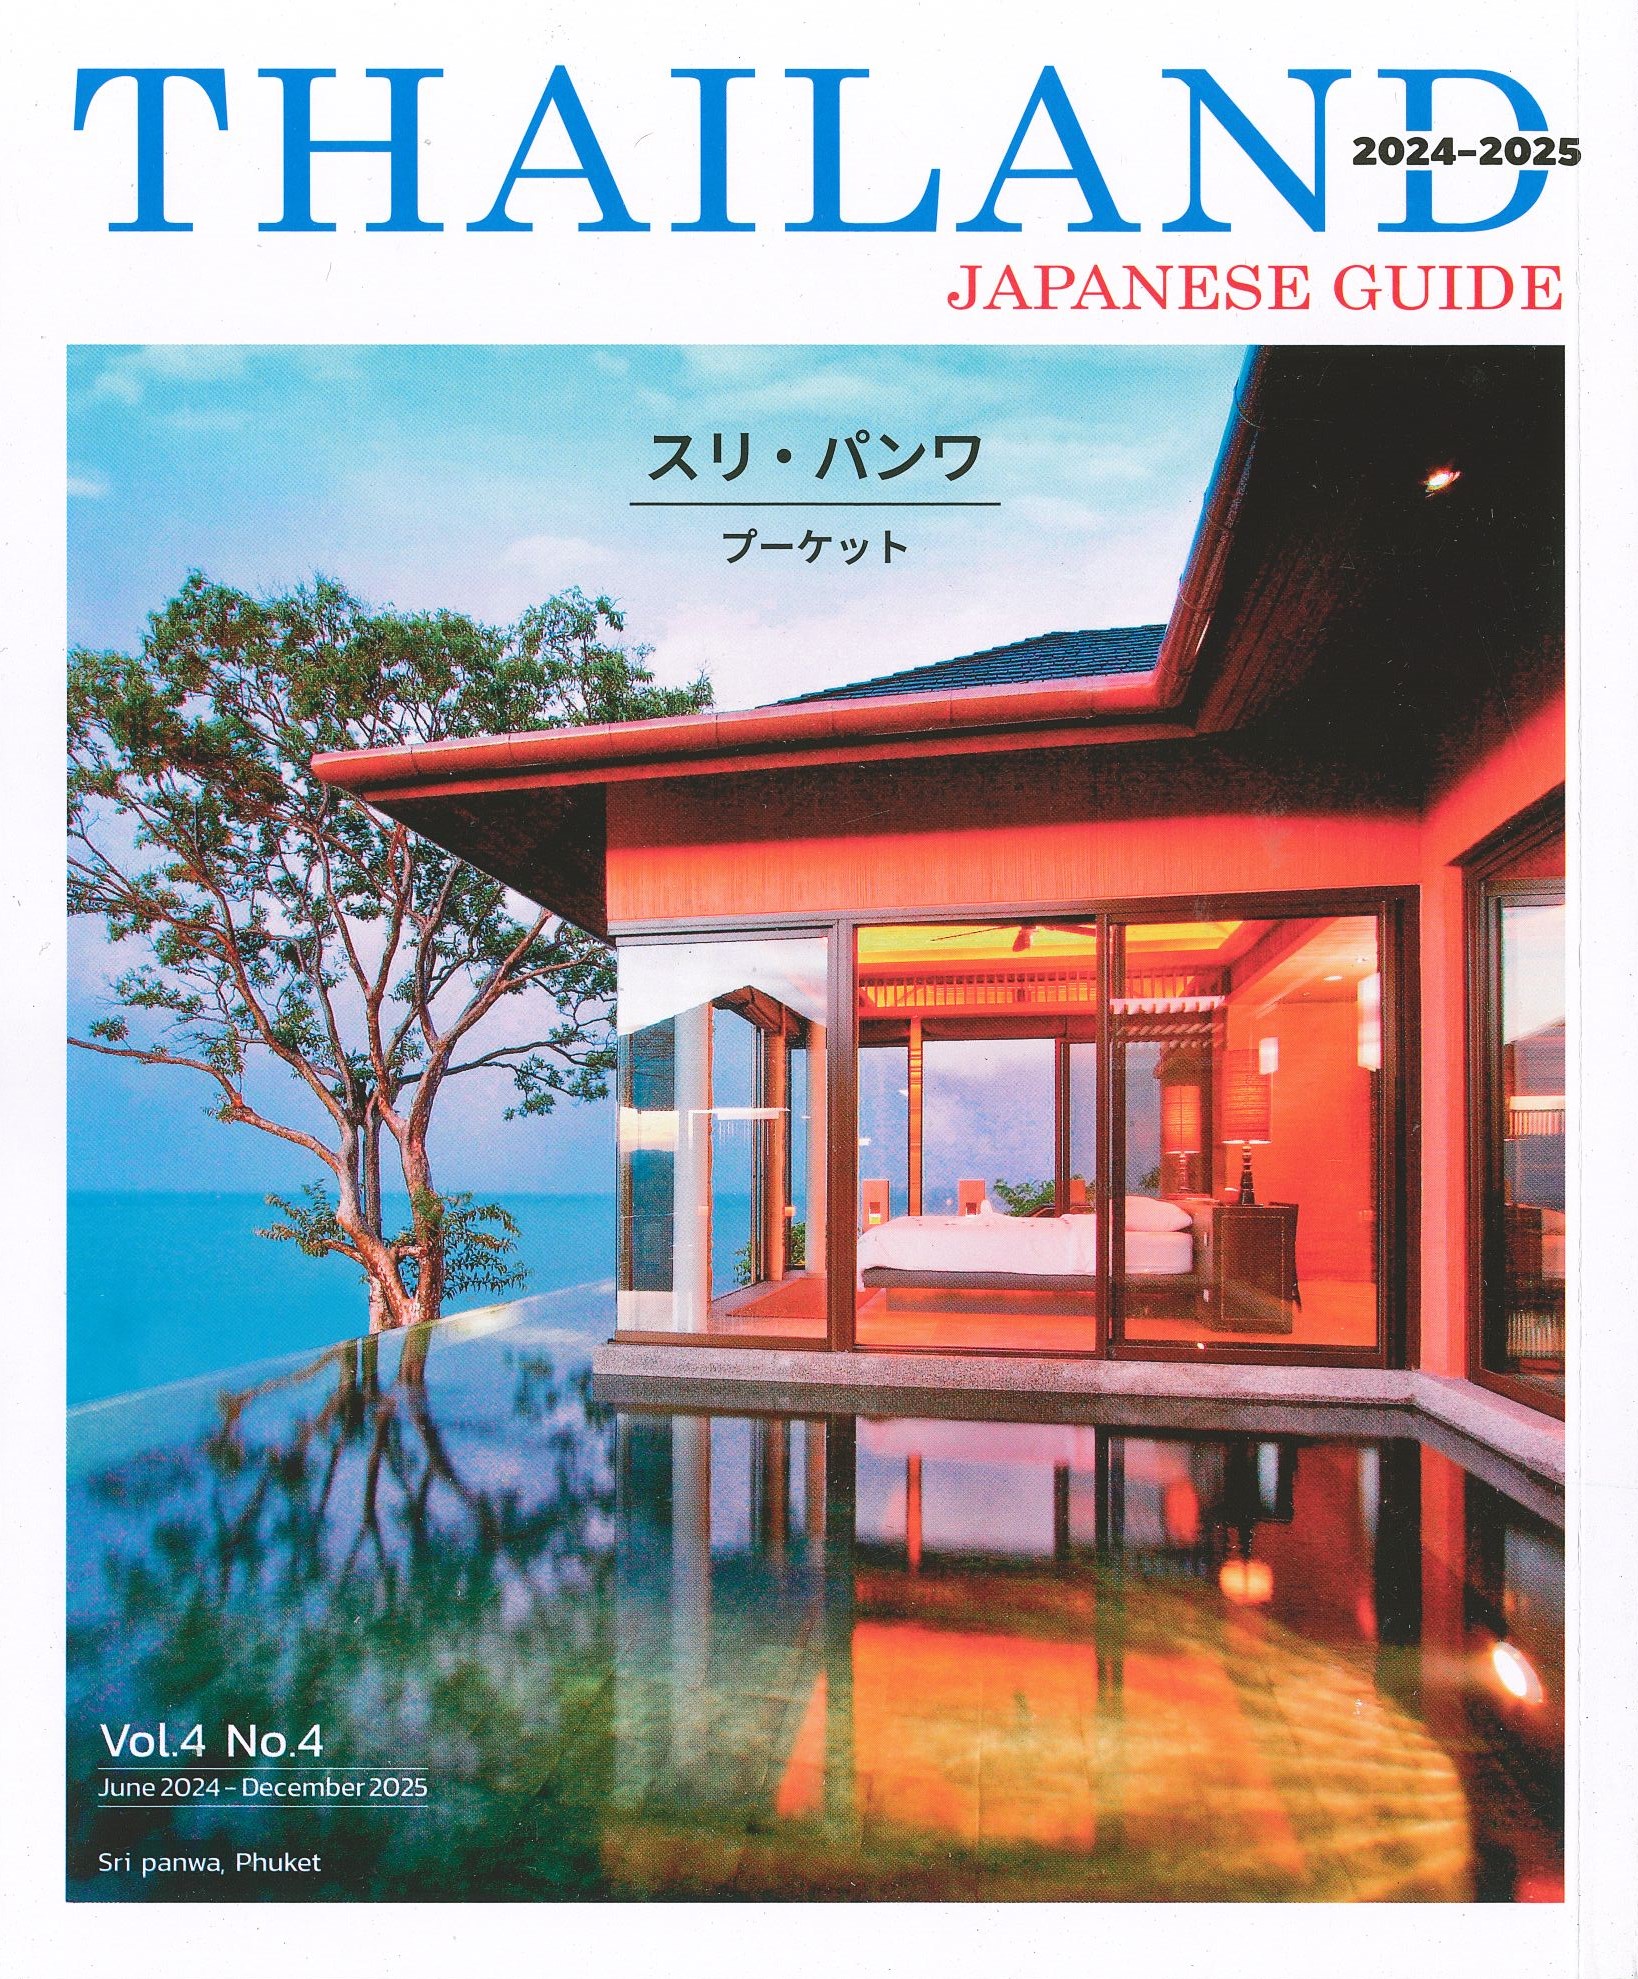 Thailand Japanese Guide 2024-2025